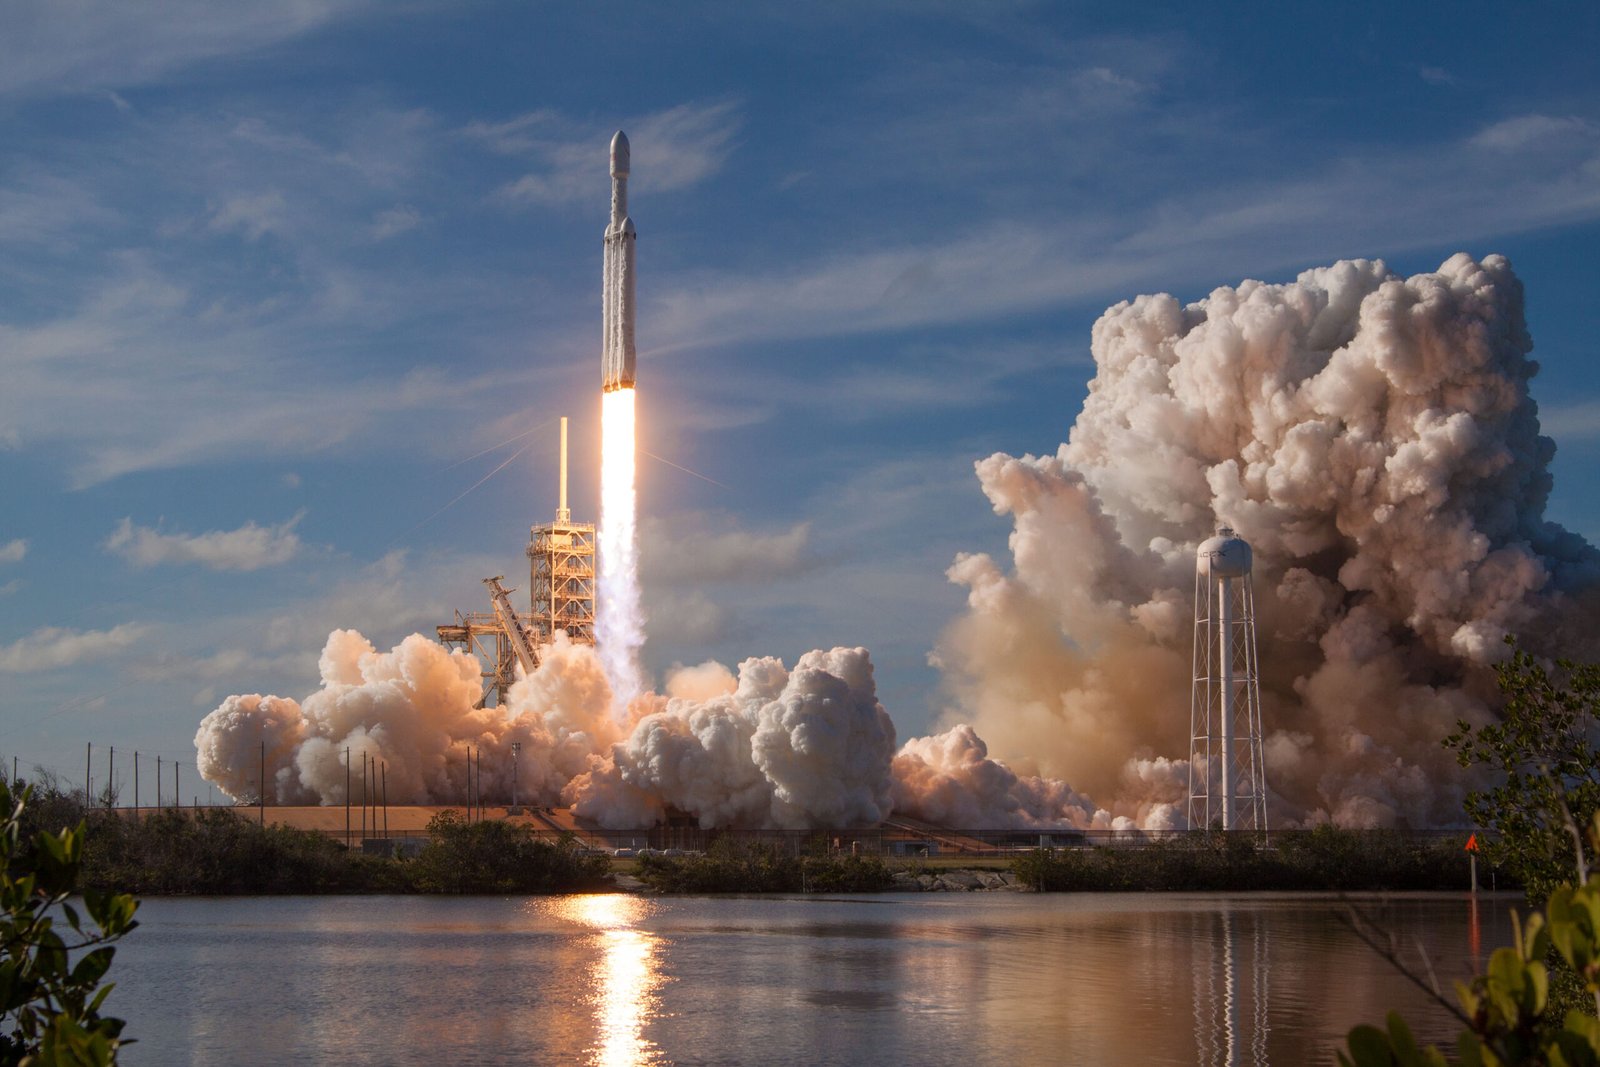 Elon Musk SpaceX Starship rocket launch images